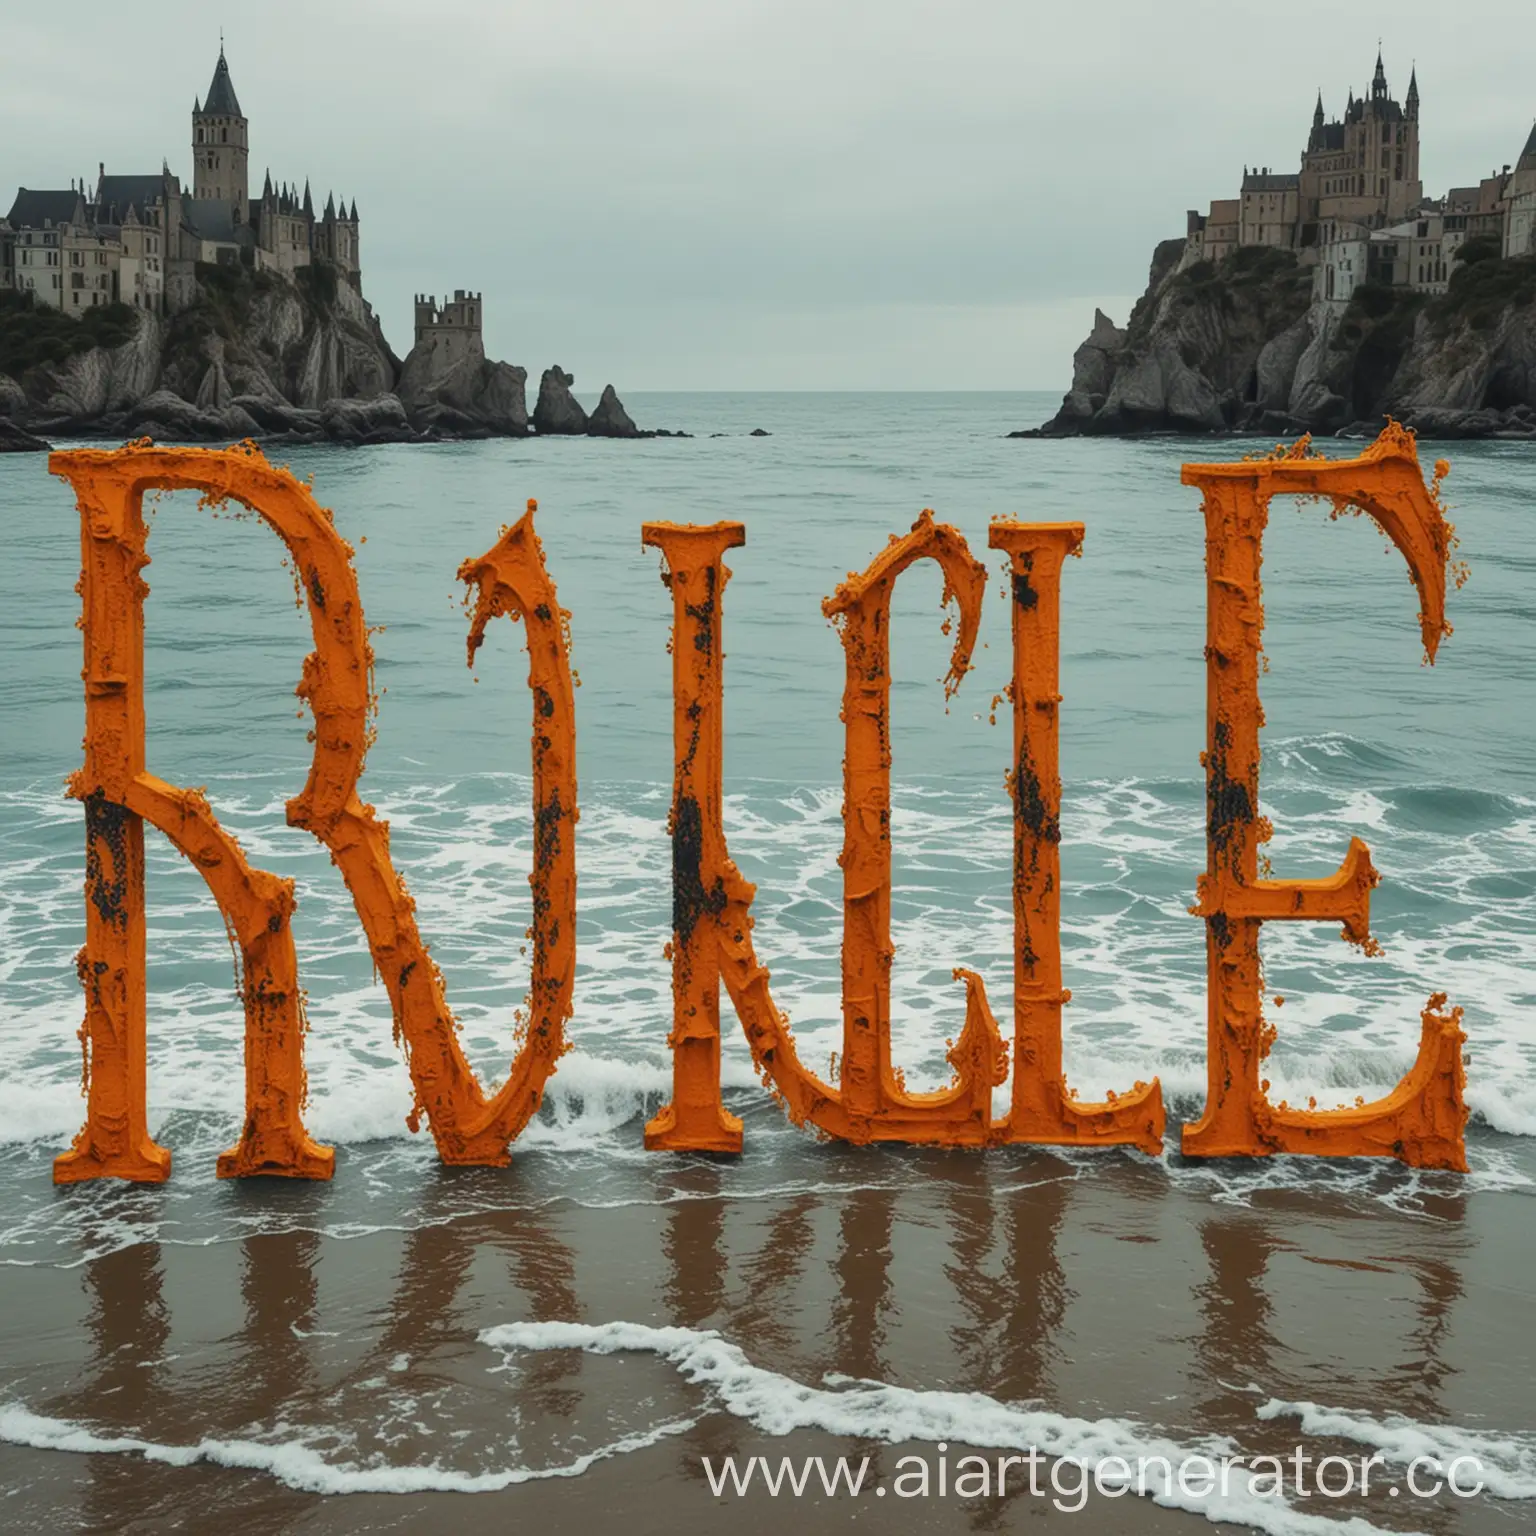 Ocean-Sunset-Majestic-Rules-Written-in-Gothic-Letters